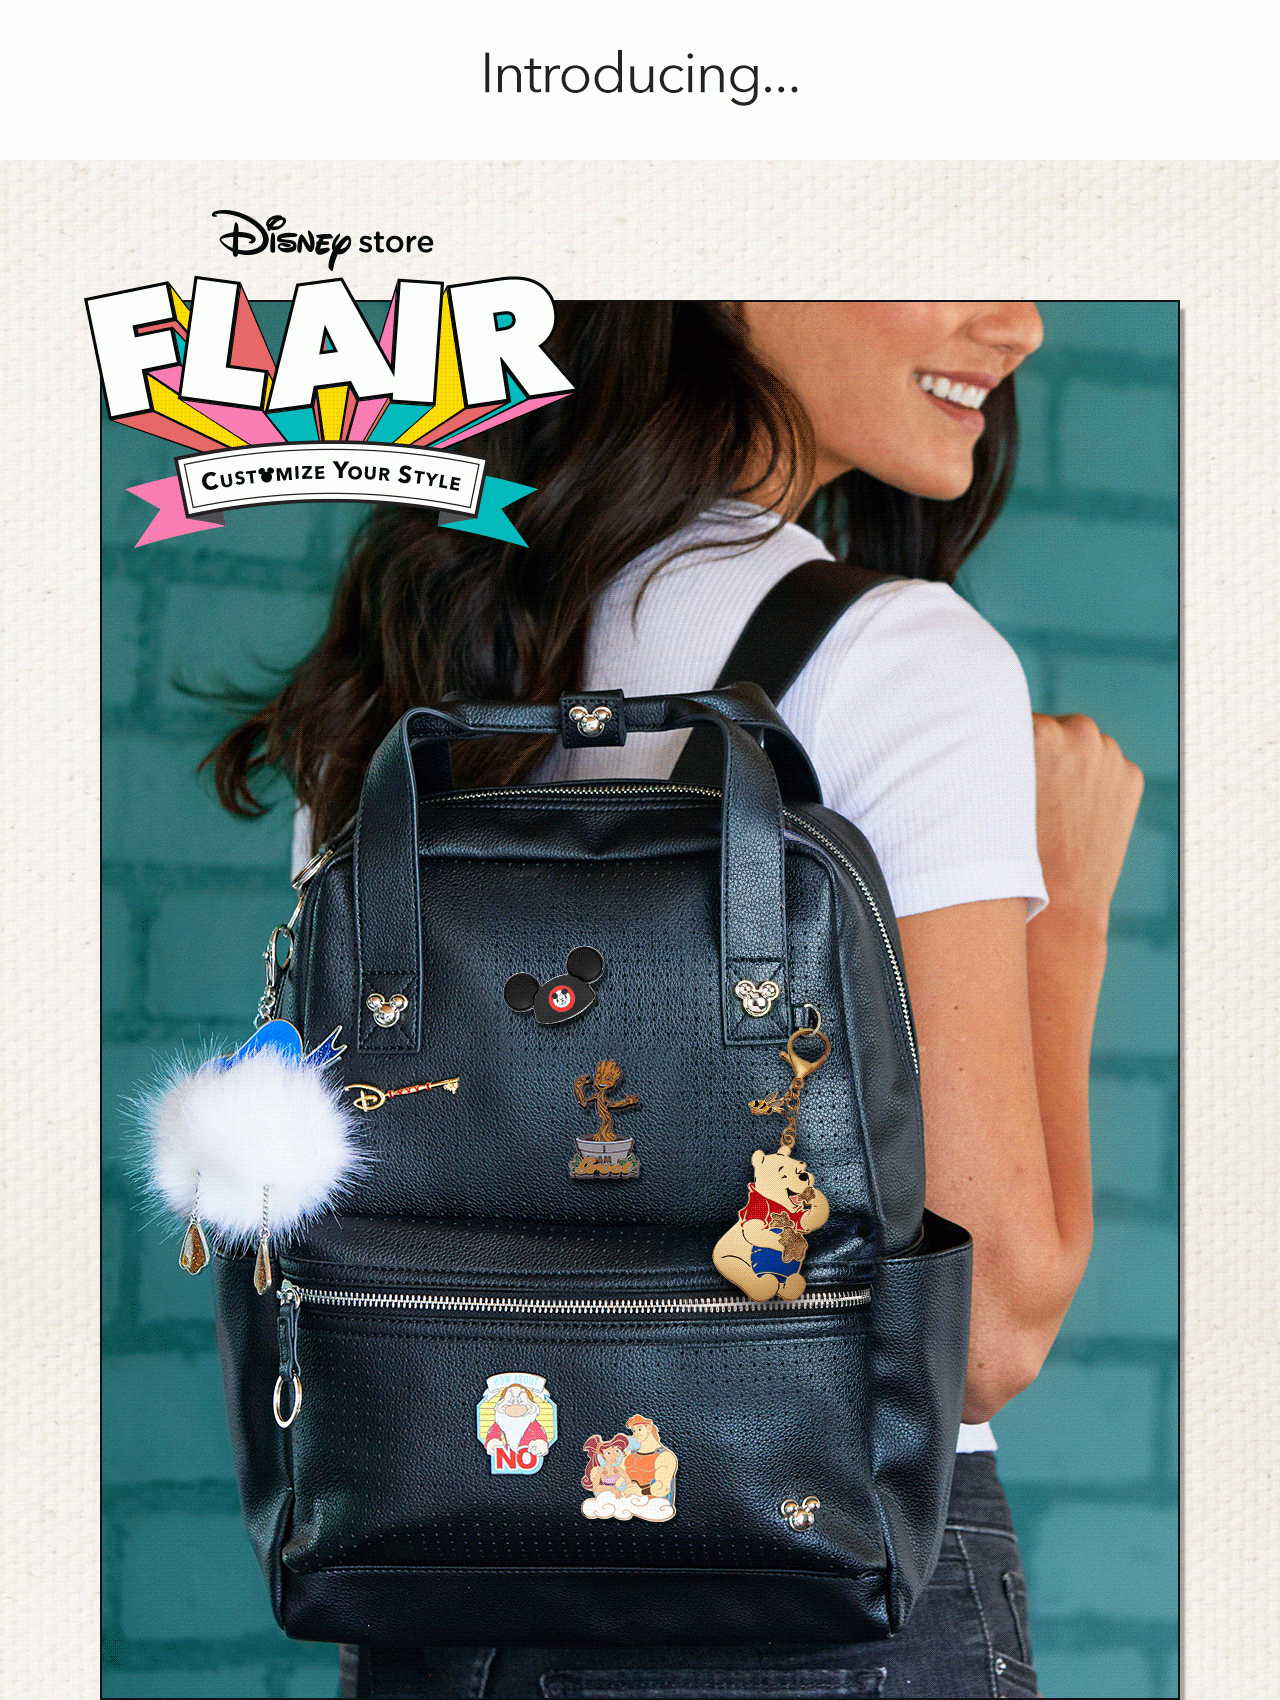 Introducing... Disney store FLAIR | Customize Your Style